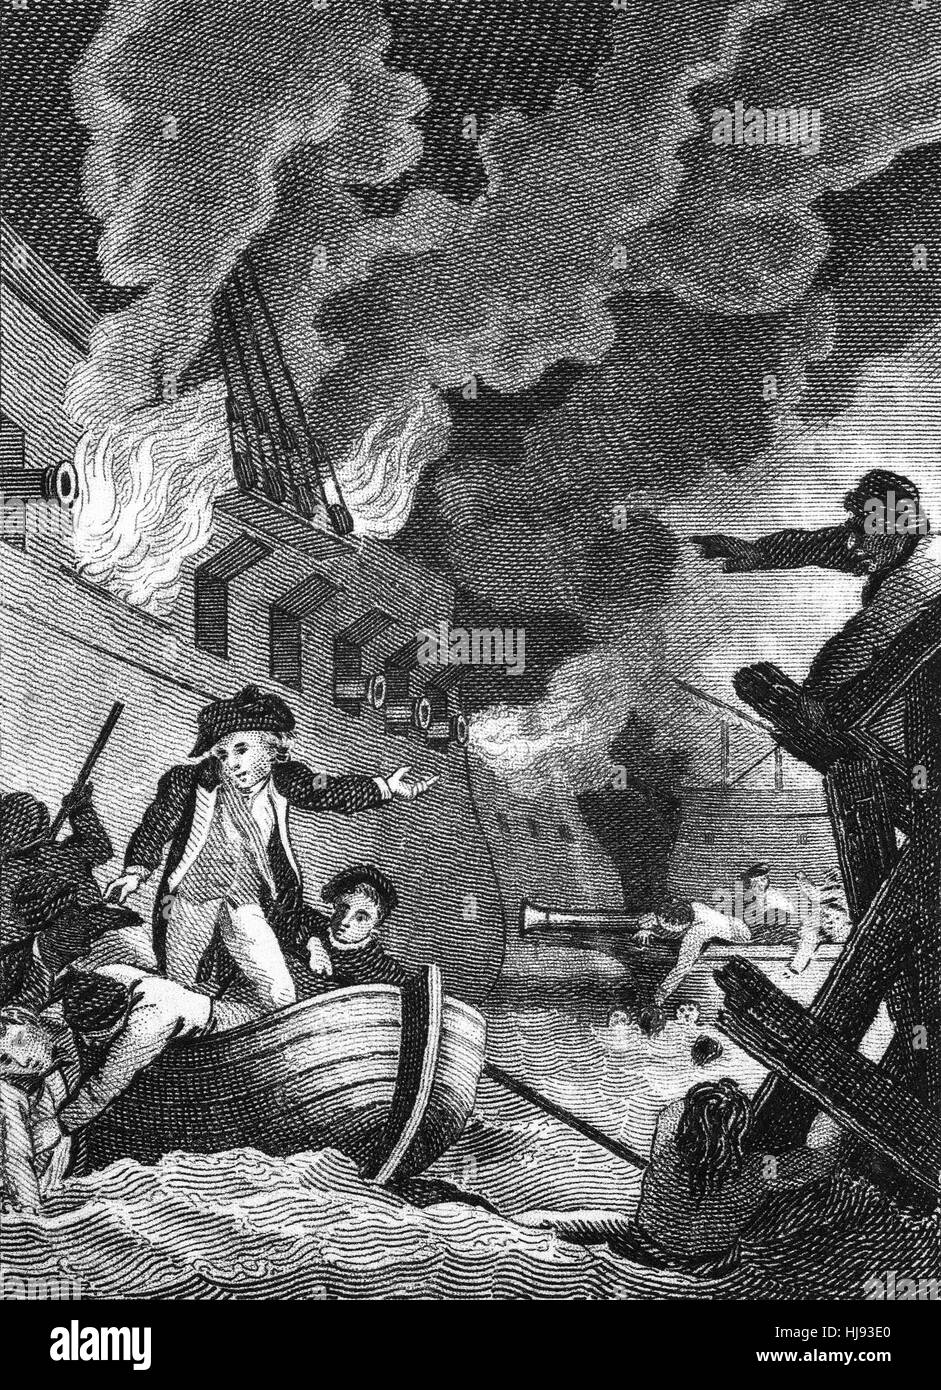 The Great Siege of Gibraltar was an unsuccessful attempt by Spain and France to capture Gibraltar from the British during the American War of Independence. This was the largest action fought during the war in terms of numbers, particularly the Grand Assault of 18 September 1782. At three years and seven months, it is the longest siege endured by the British Armed Forces. Stock Photo